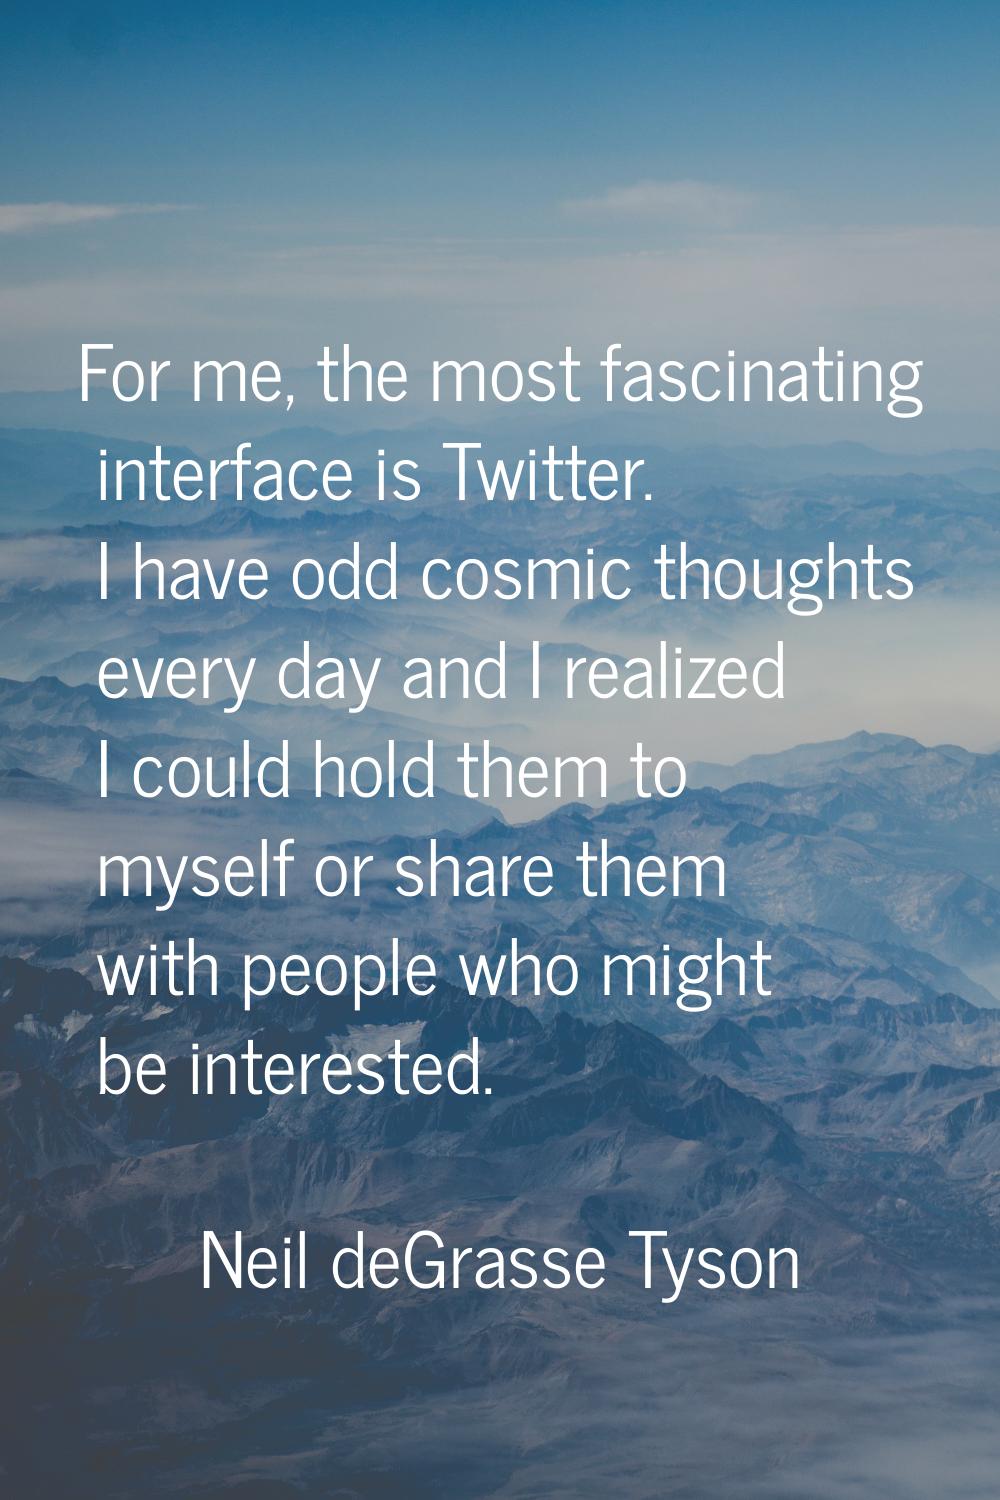 For me, the most fascinating interface is Twitter. I have odd cosmic thoughts every day and I reali